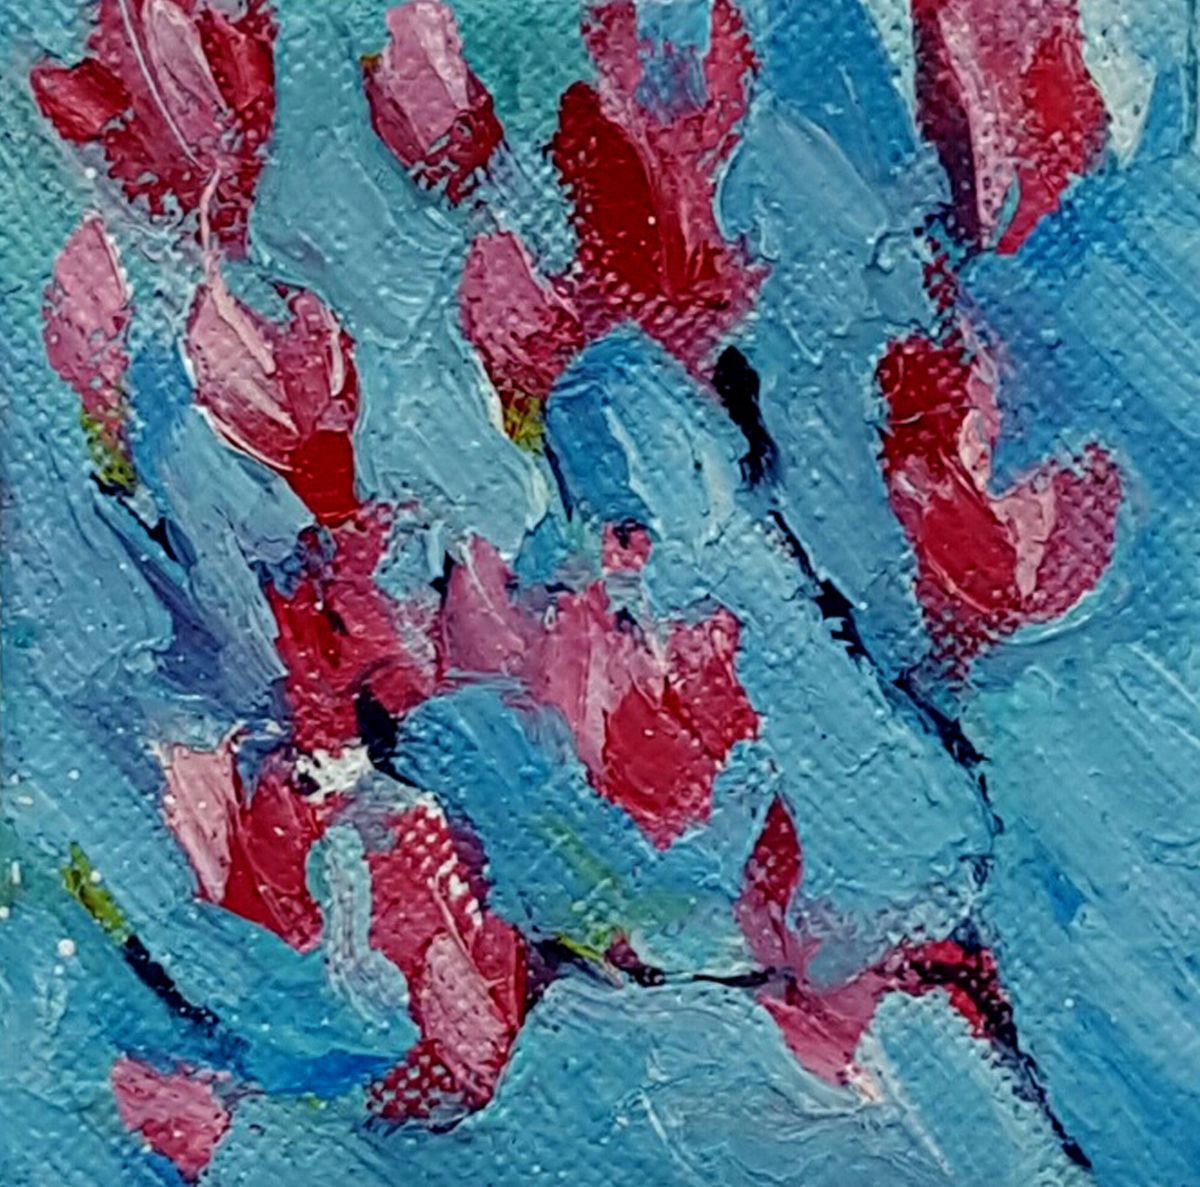 Magnolia Delight in a blue sky by Niki Purcell